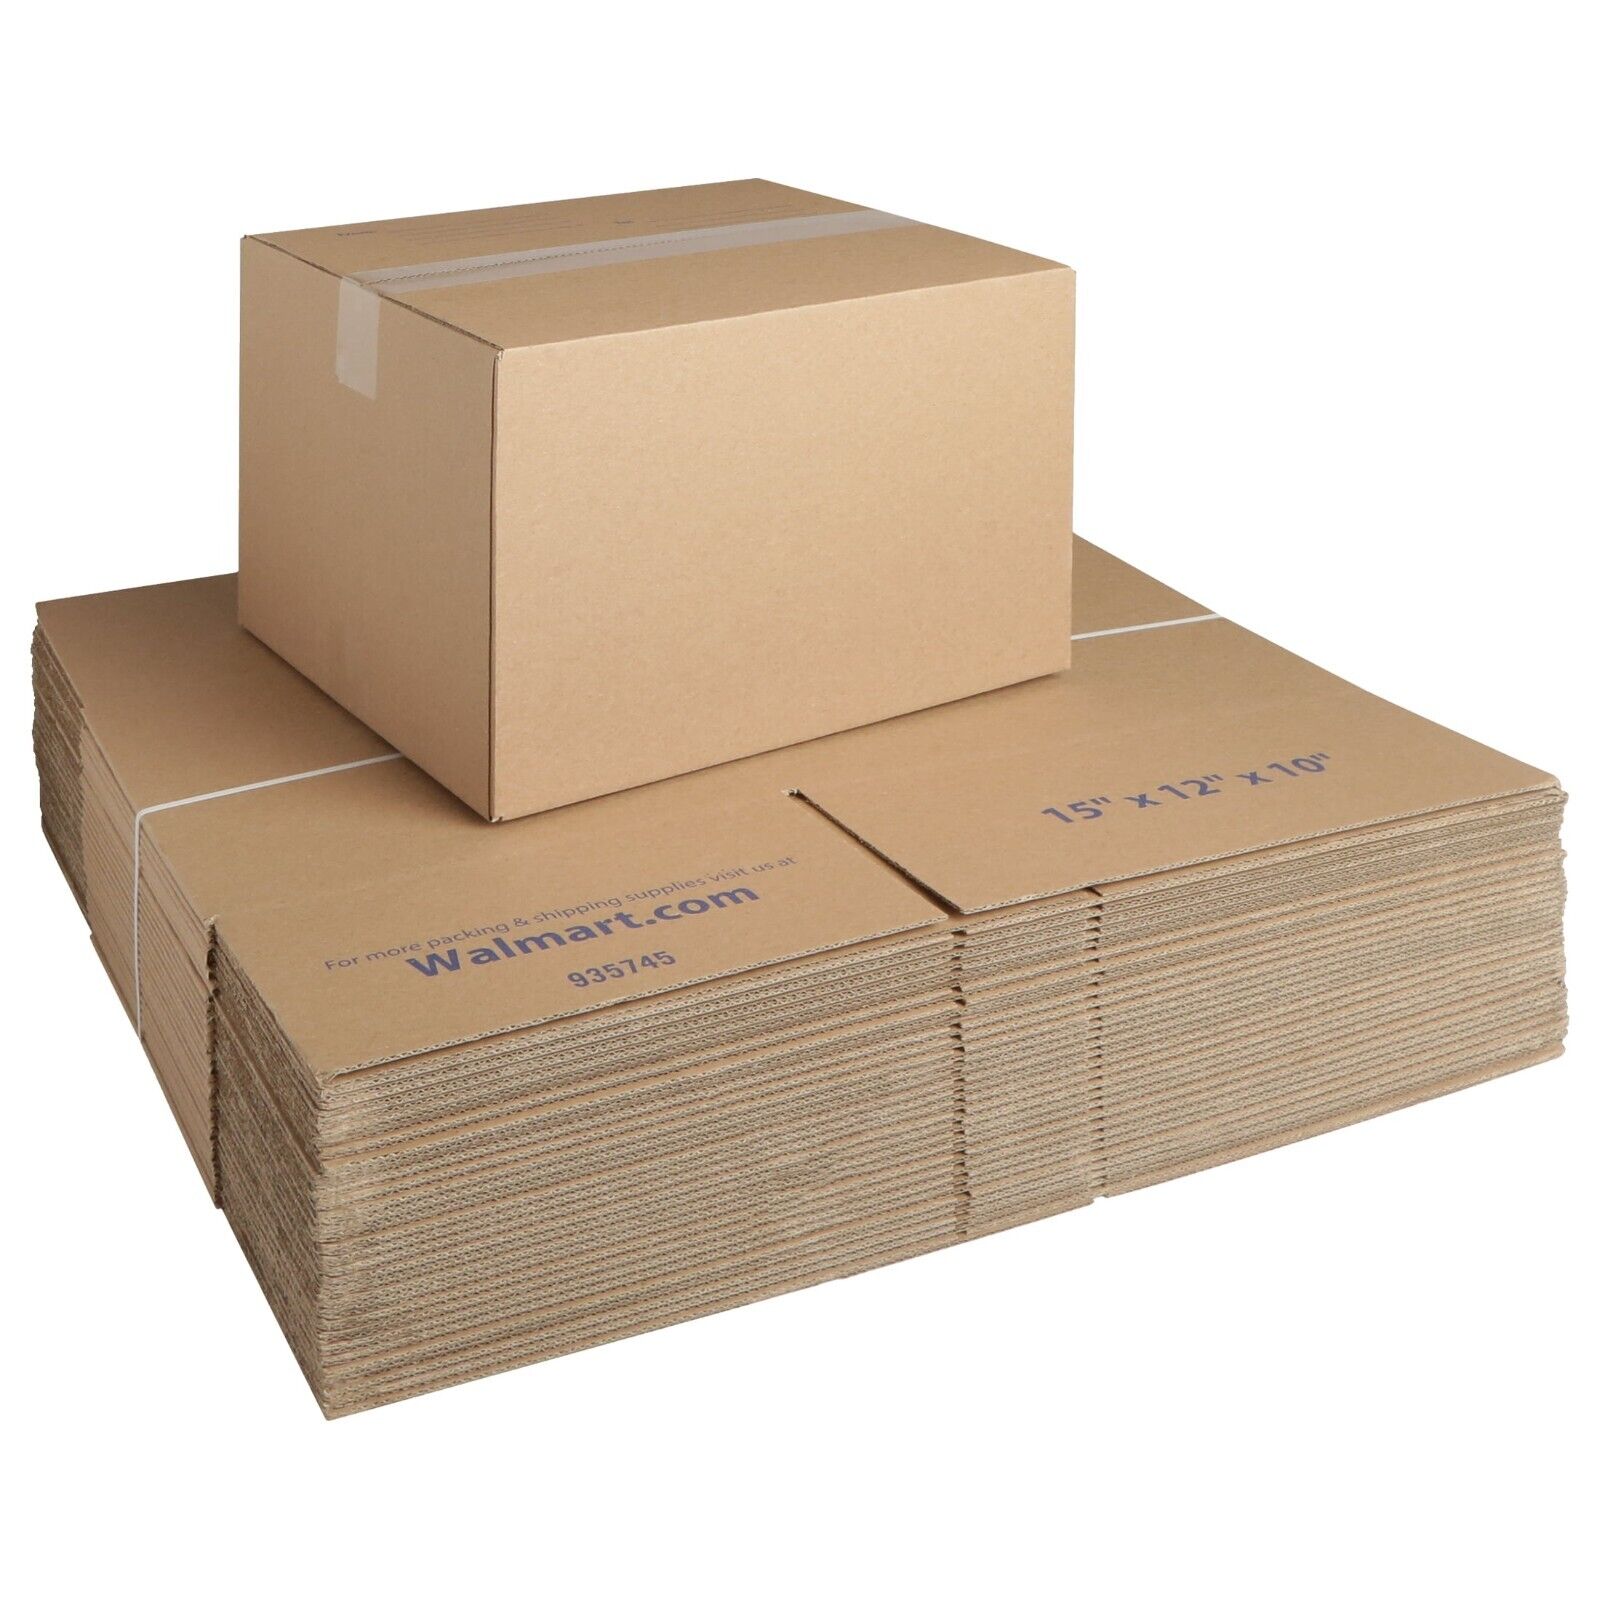 FAST SHIPPING Recycled Shipping Boxes 15 in. L x 12 in. W x 10 in. H, 30-Count